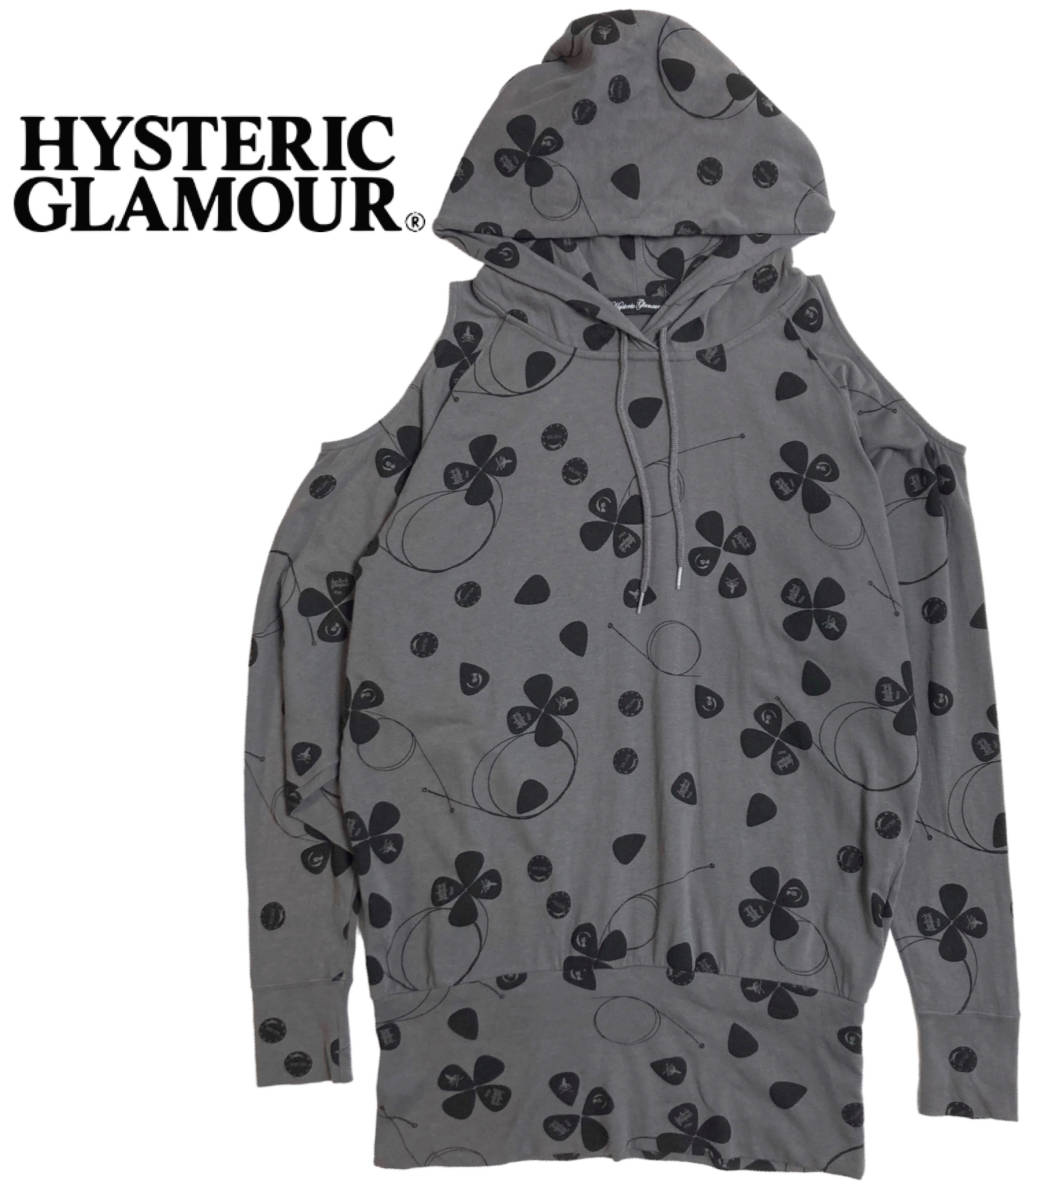 HYSTERIC GLAMOUR pick clover shoulder .. Parker Hysteric Glamour 0121CF04 total pattern 